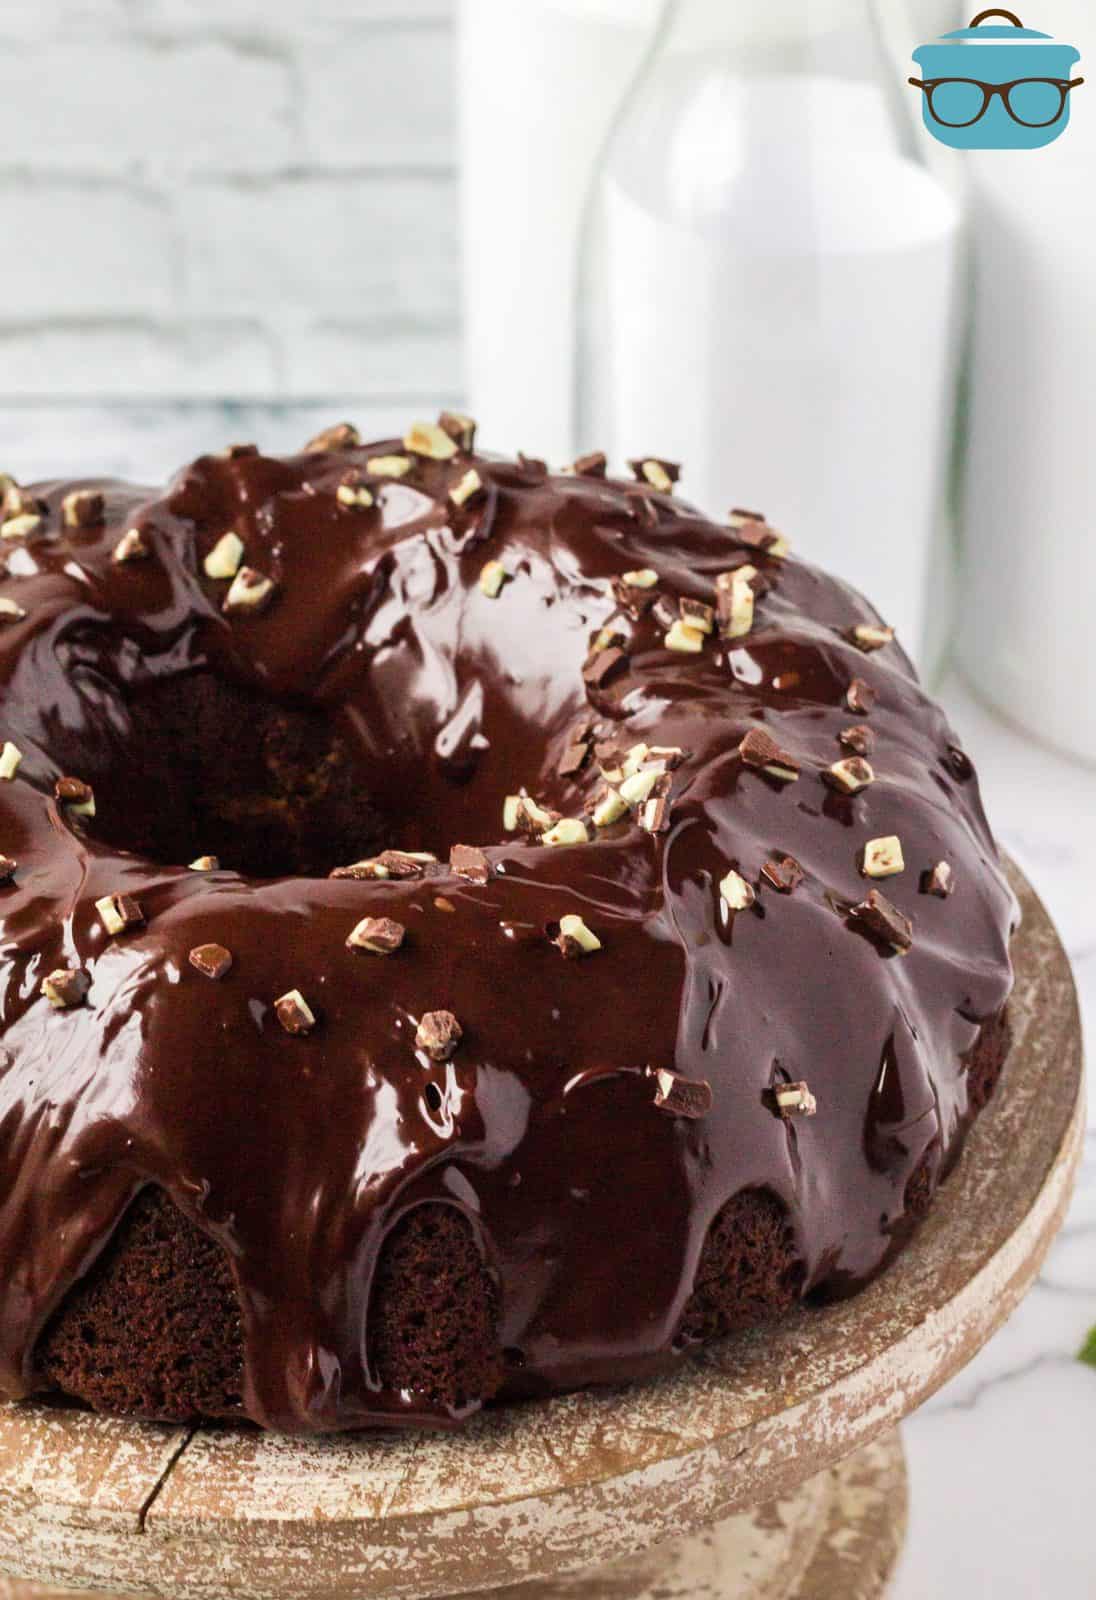 Mint Chocolate Bundt Cake covered in ganache and topped with chopped Andes mints.